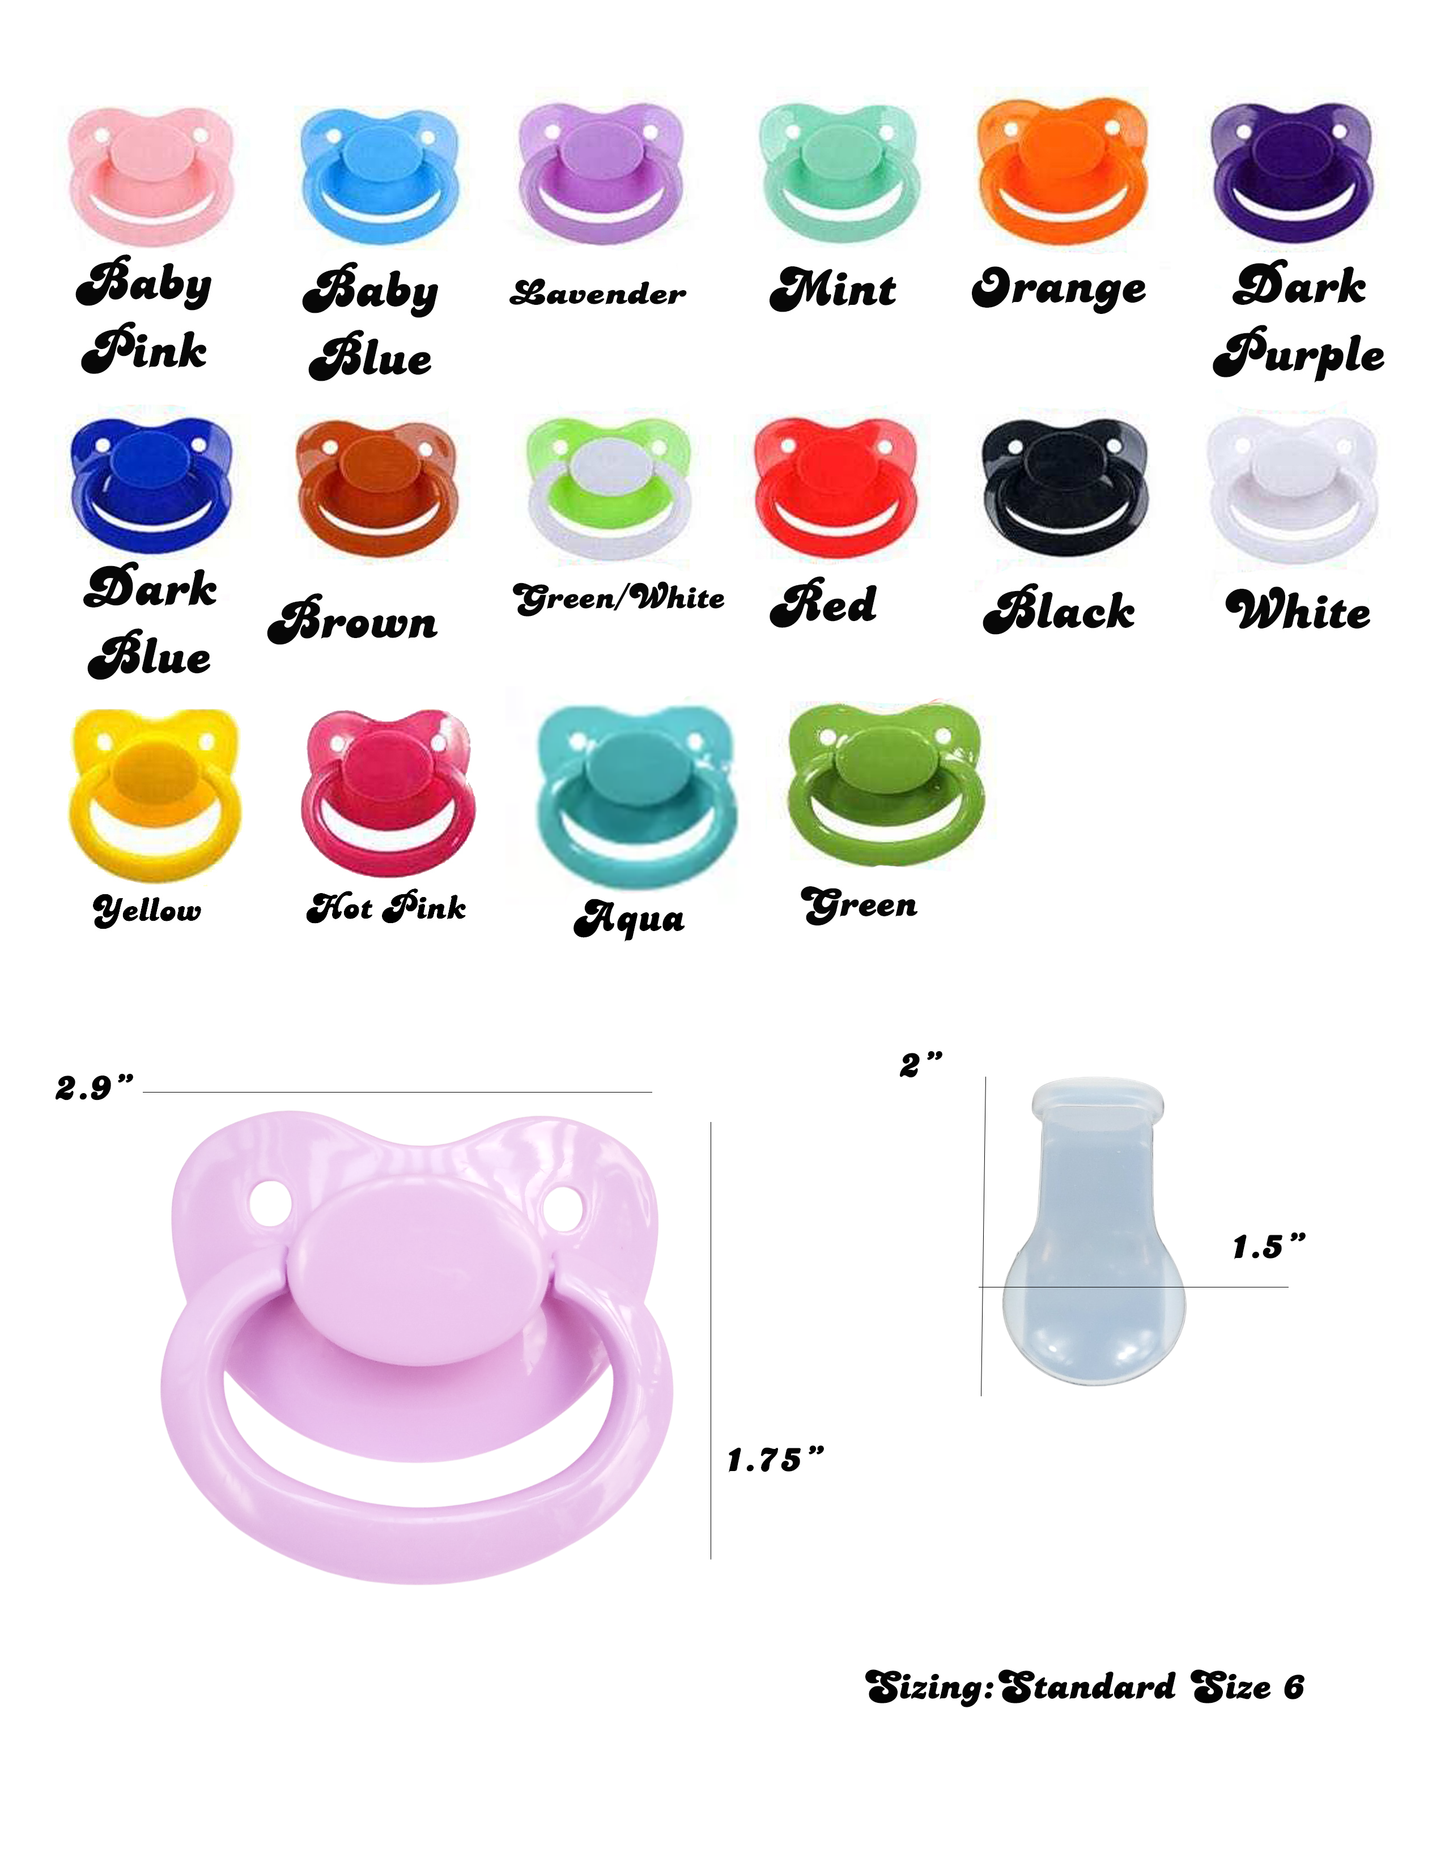 Daddy's Girl Adult Pacifier